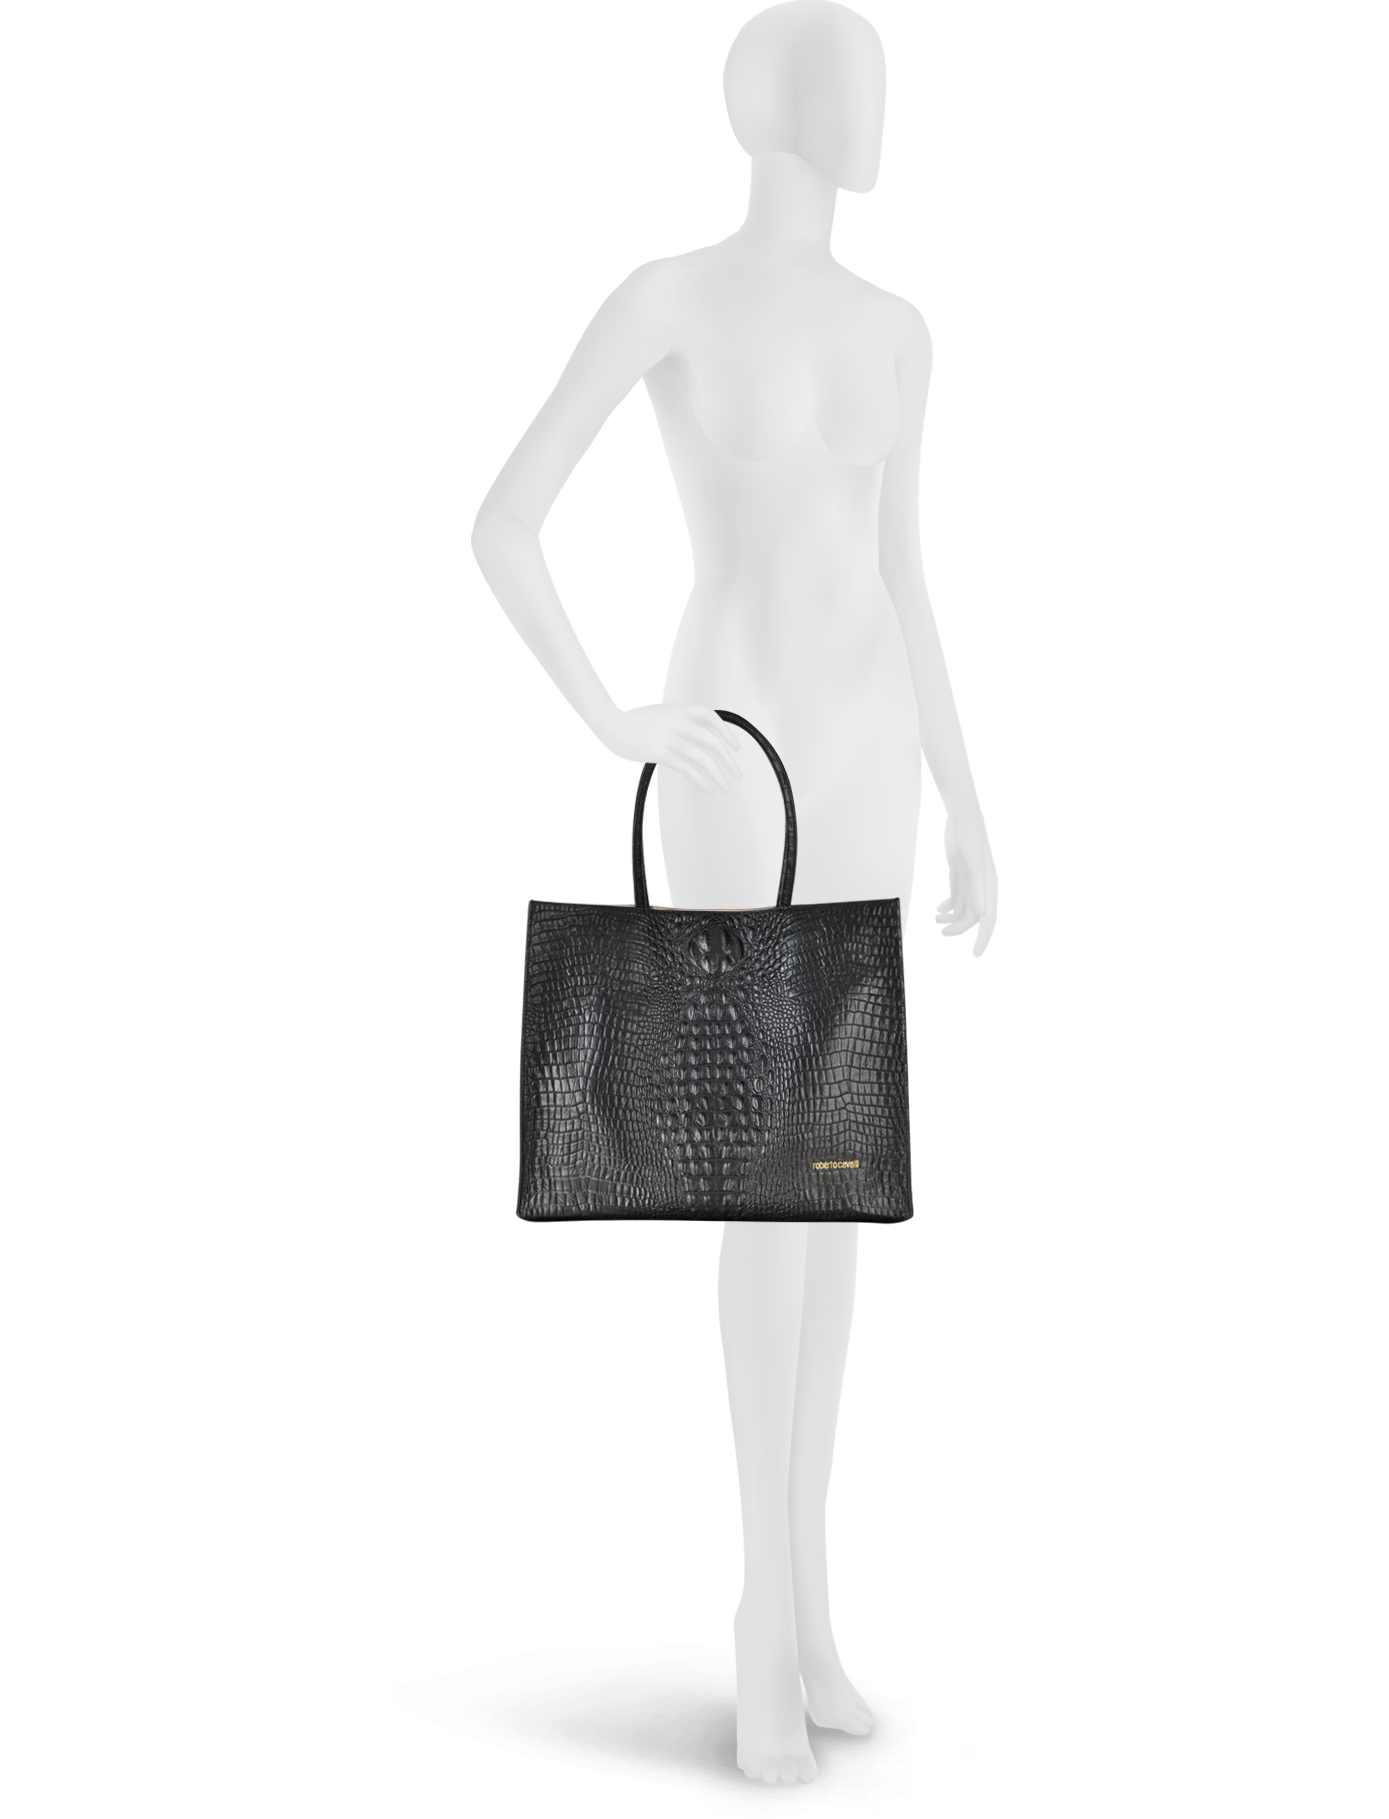 Roberto Cavalli Graphic Caiman Leather Tote at FORZIERI